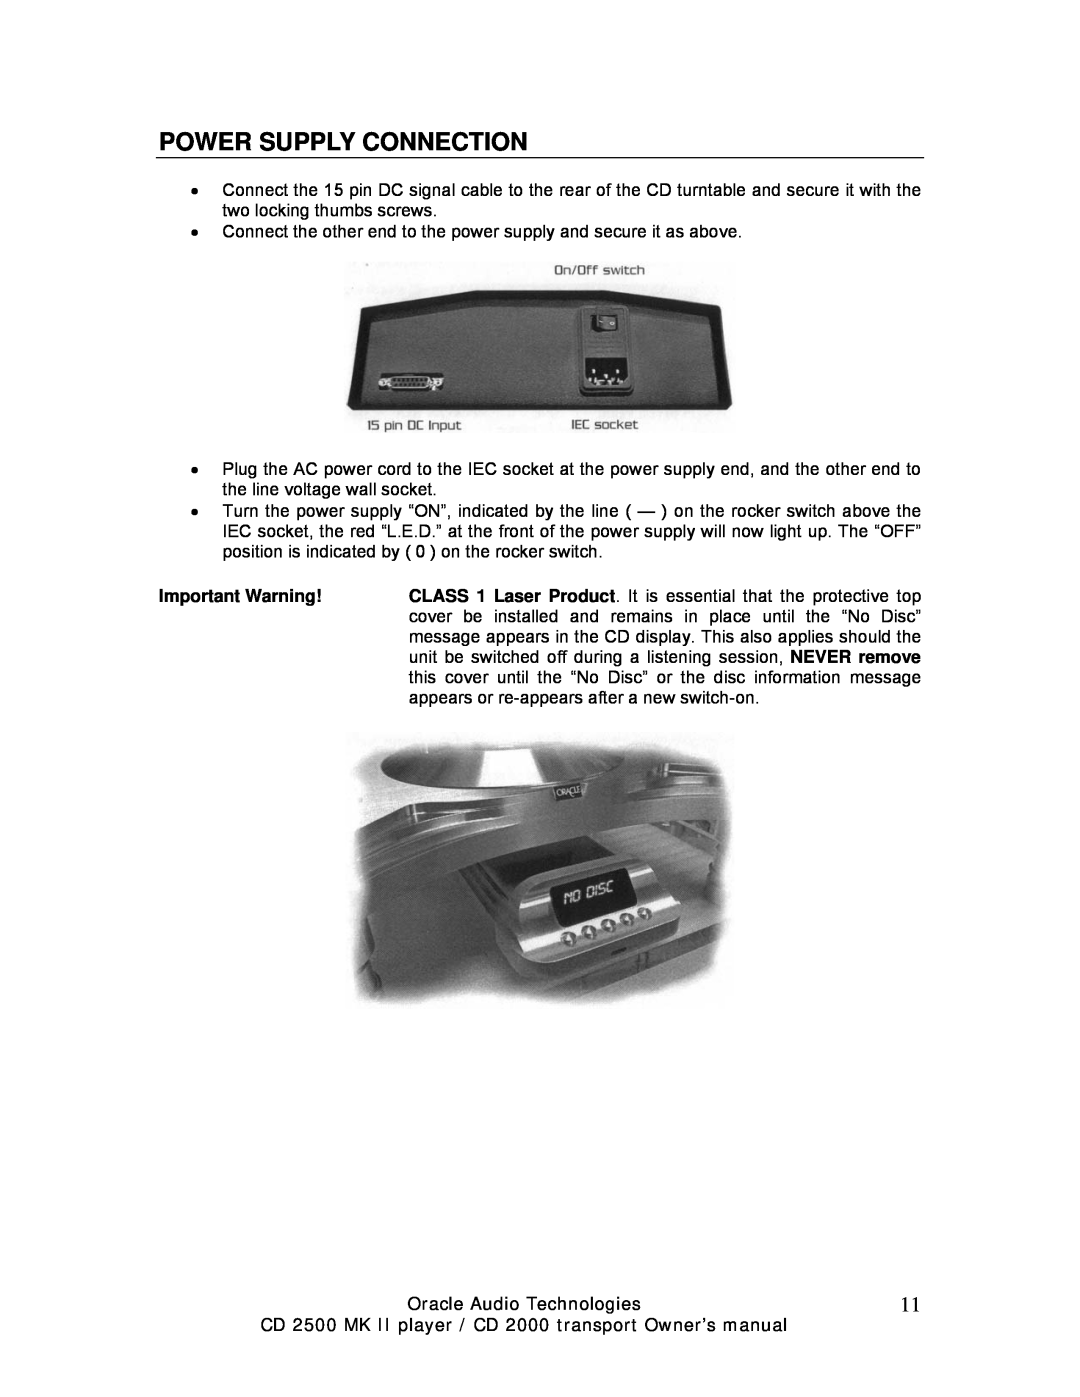 Oracle Audio Technologies 2000 Transport, CD 2000, 2500 MK II manual Power Supply Connection, Important Warning 